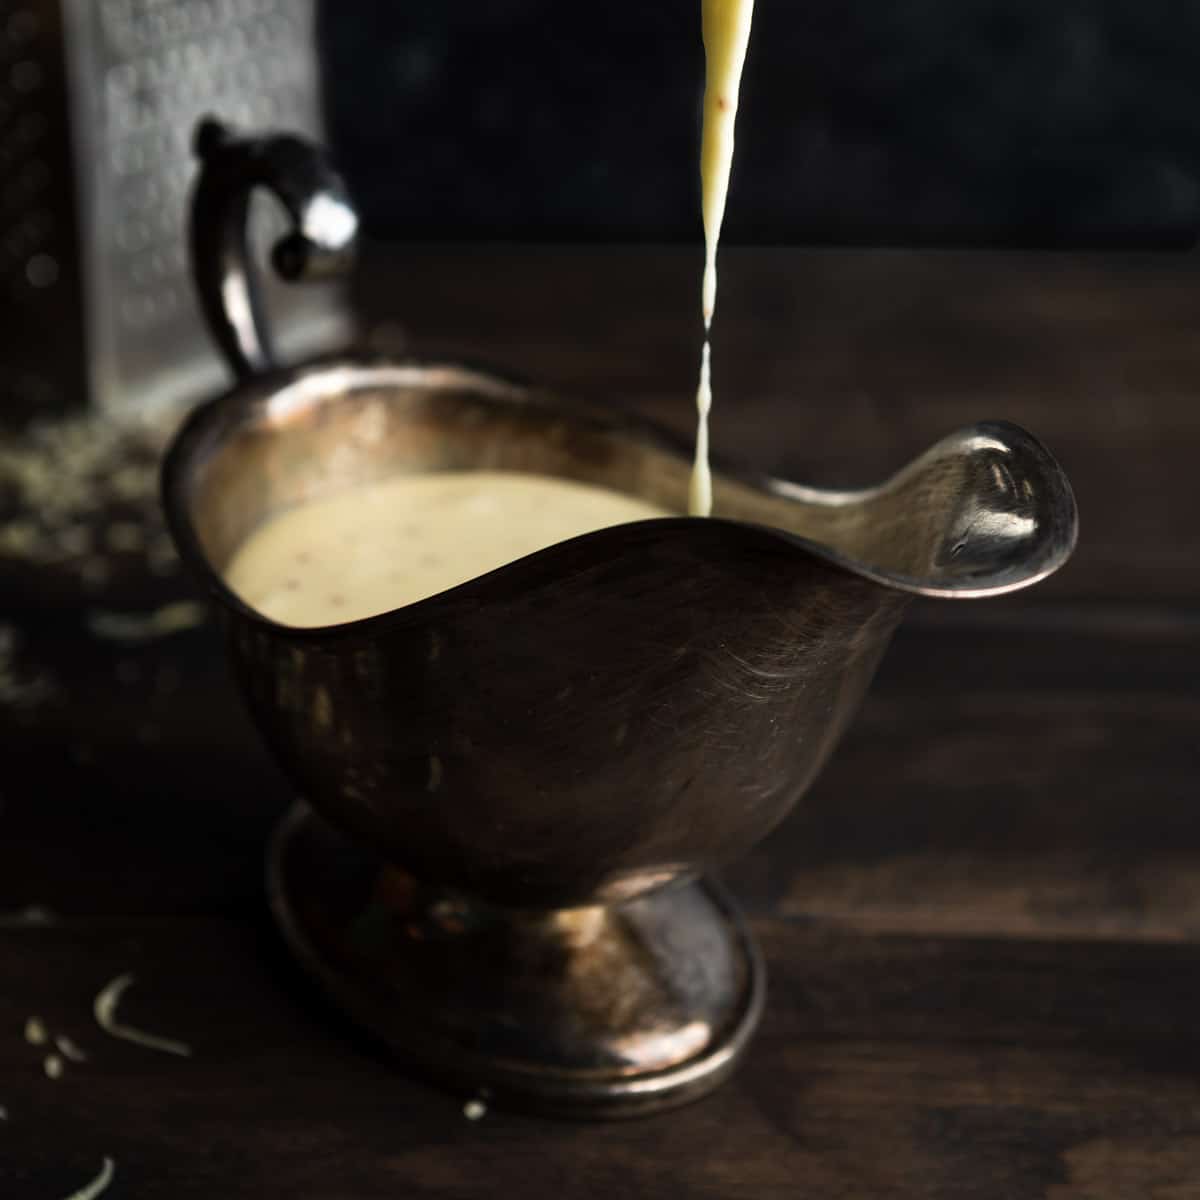 Pouring cheese sauce into an ornate gravy boat